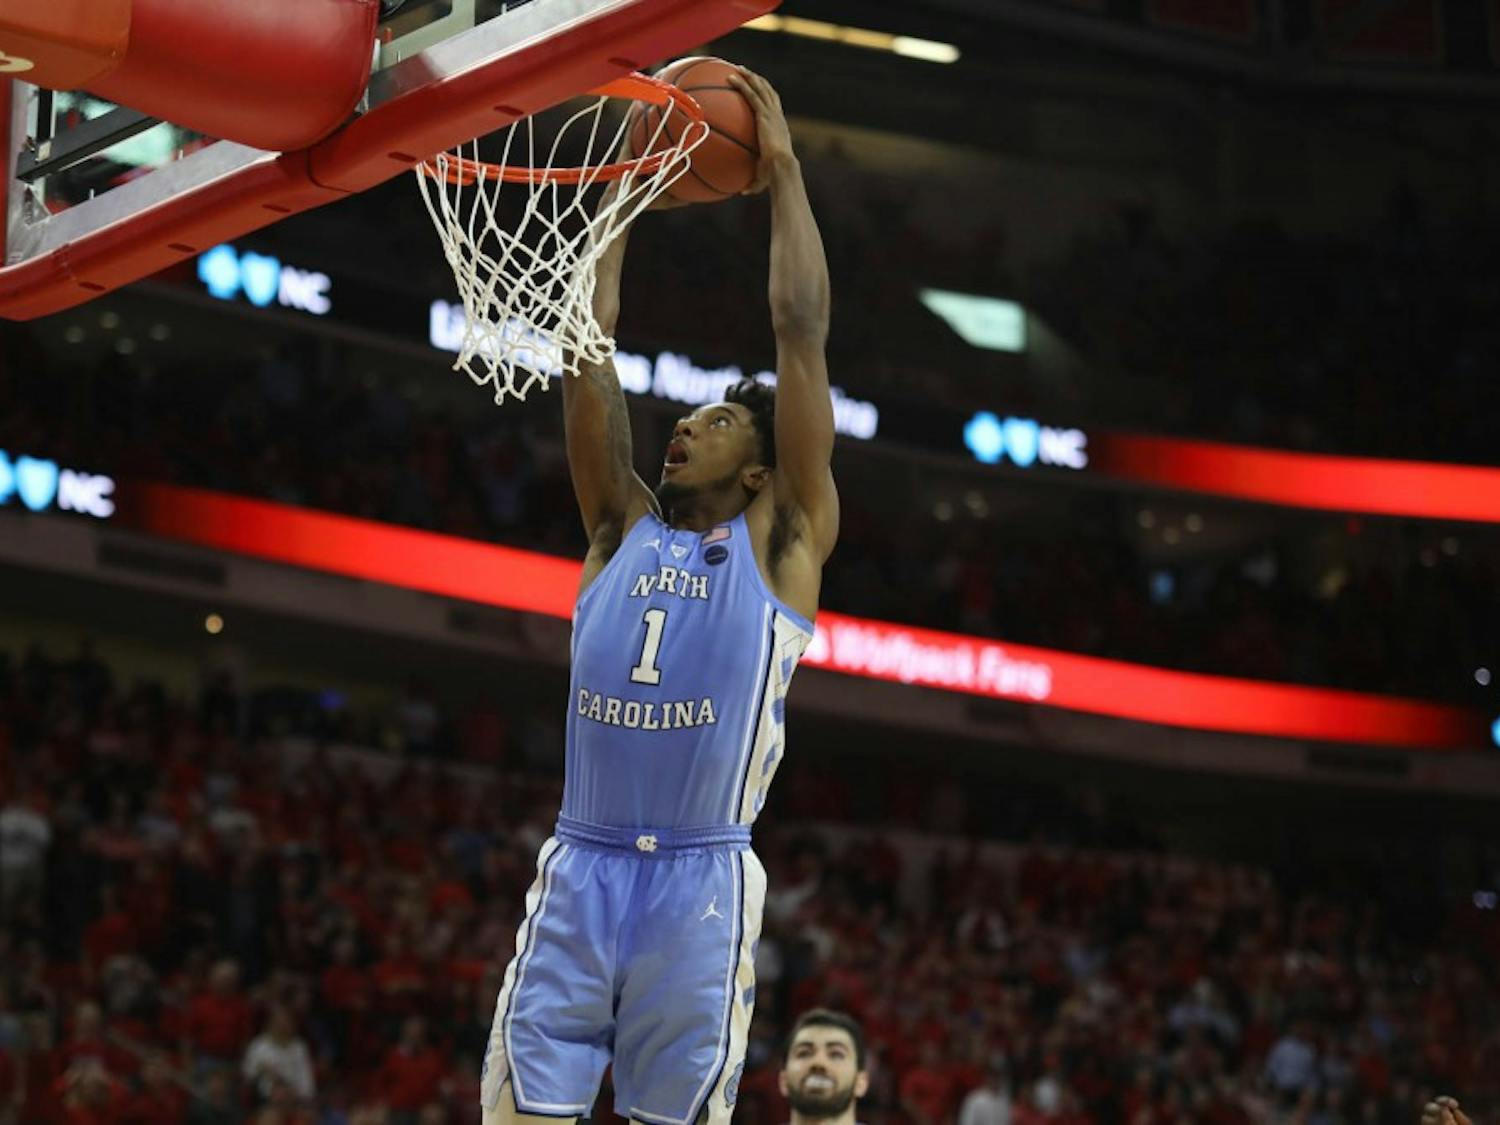 Gallery: UNC men's basketball defeats N.C. State 90-82